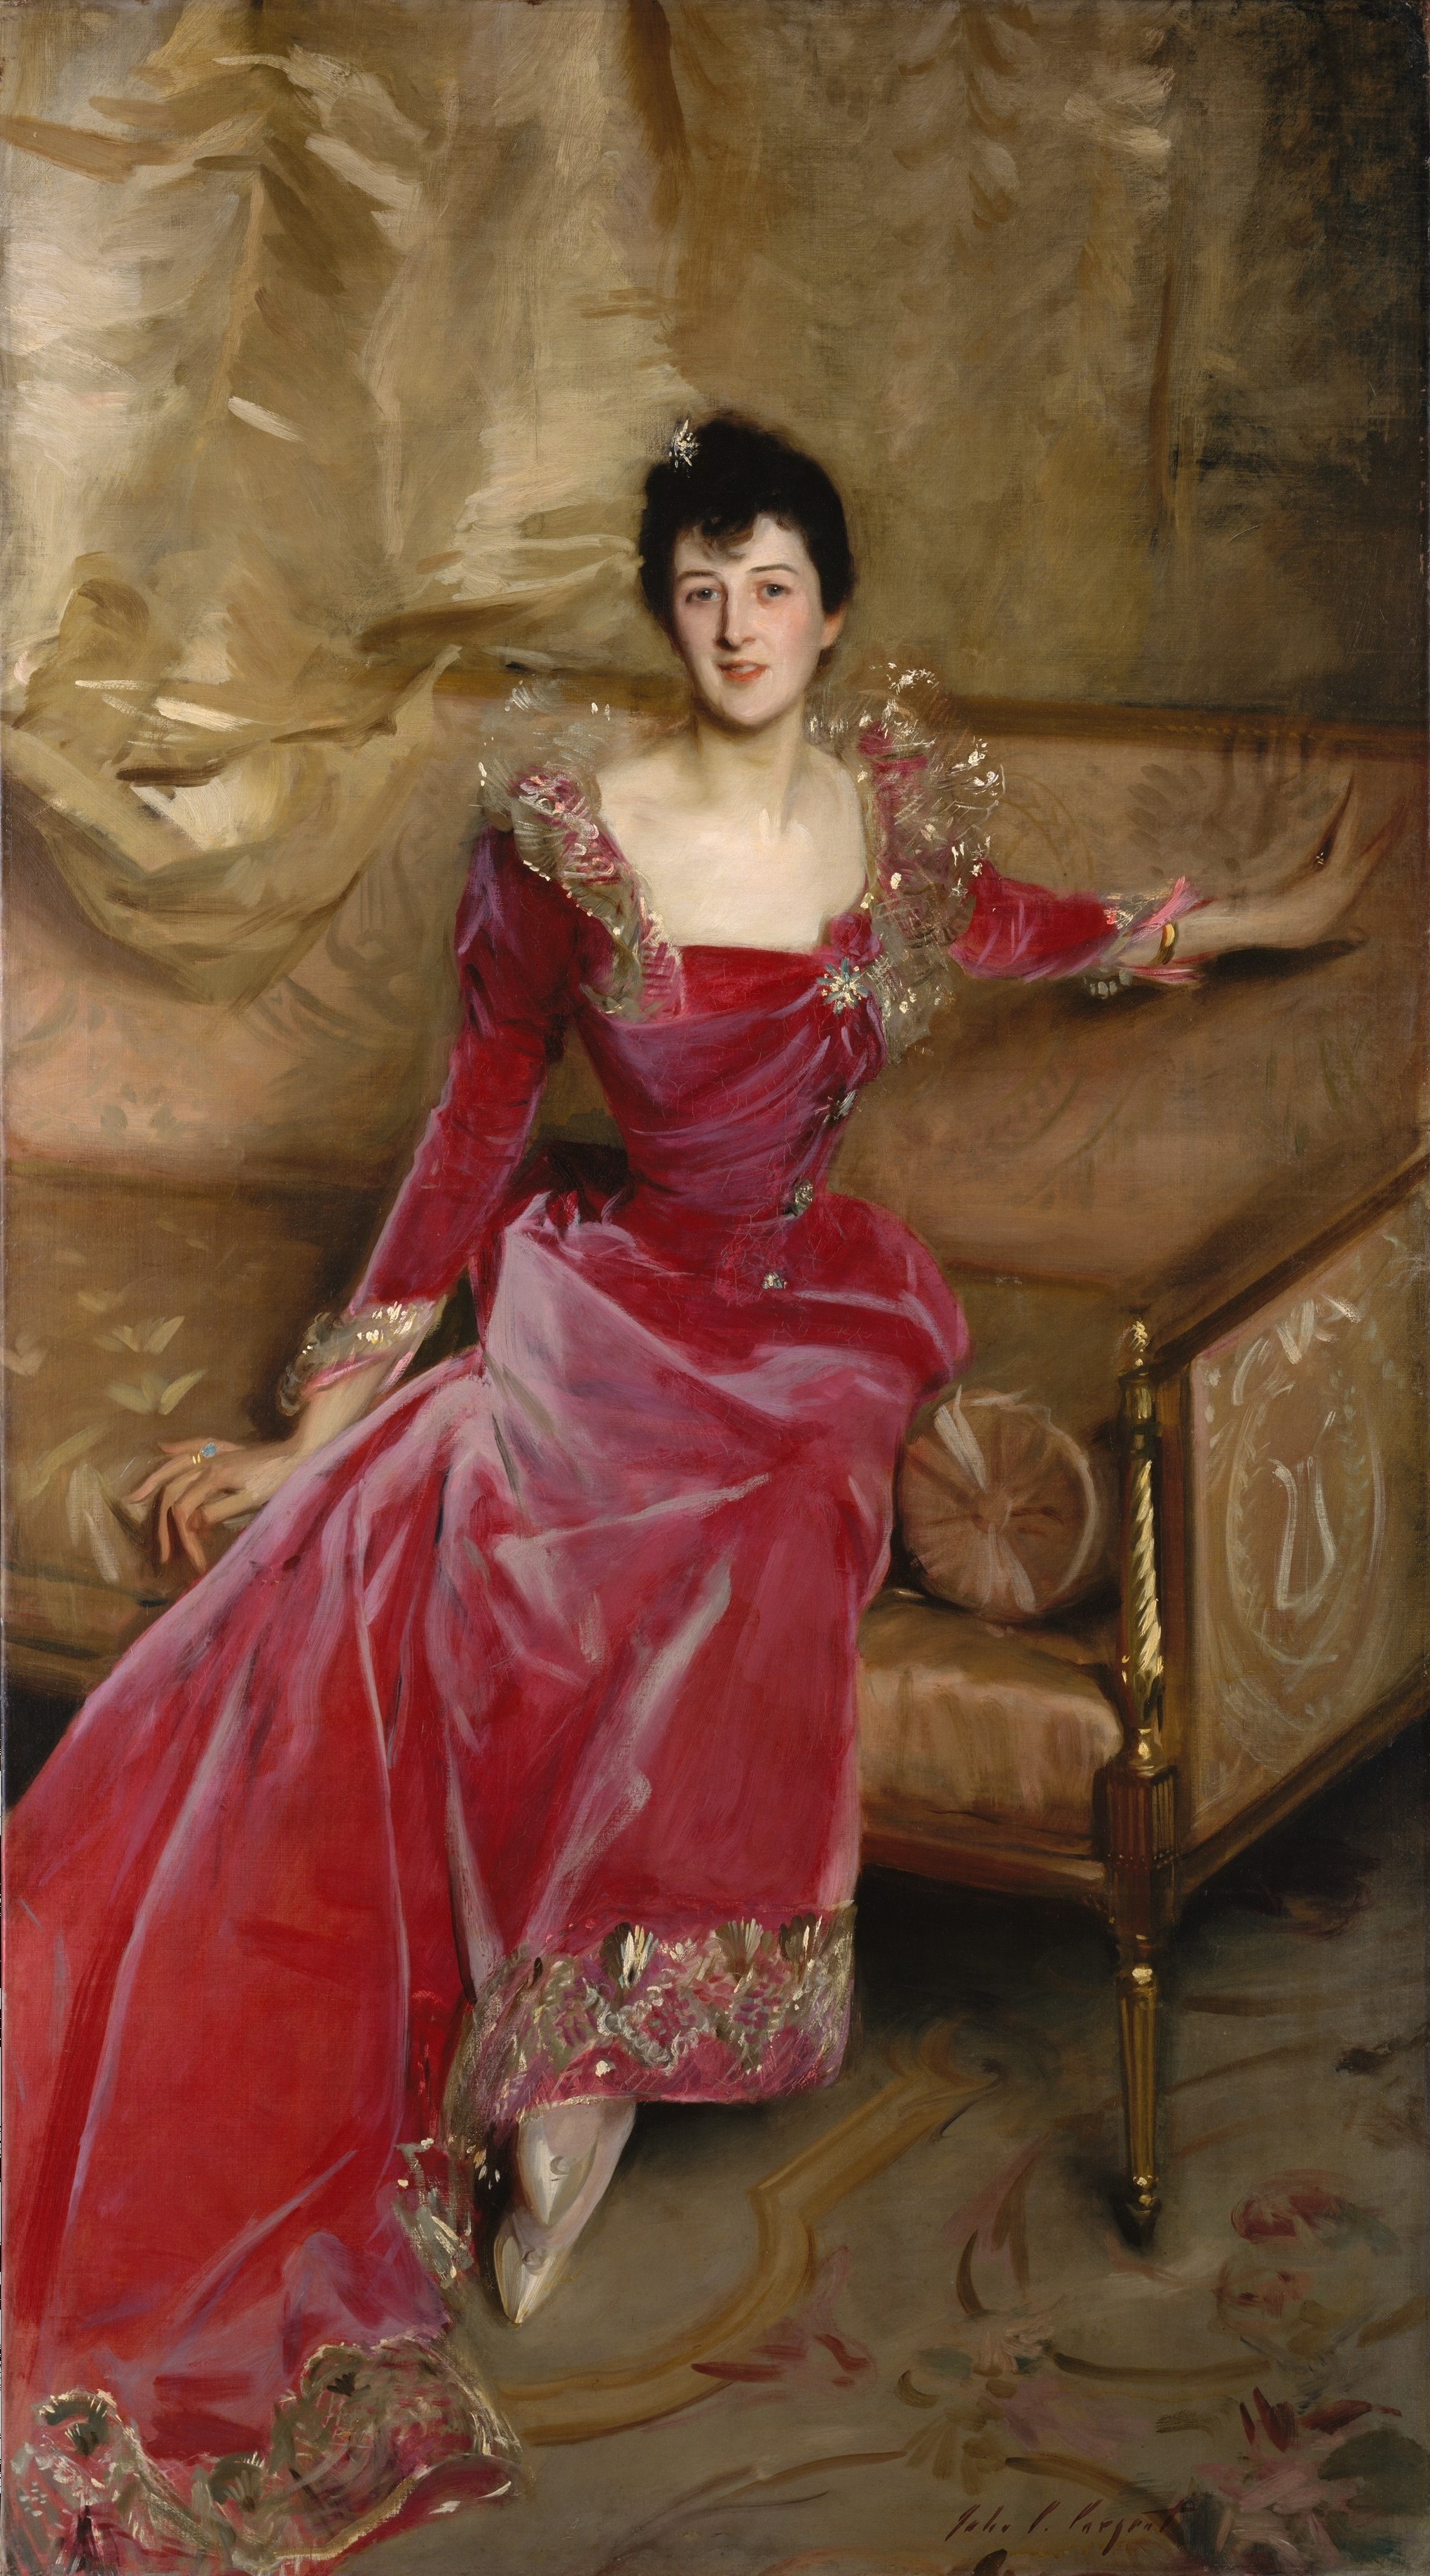 Oil on canvas painting of a fashionable late 19th century Englishwoman seated and wearing a dark pink dress